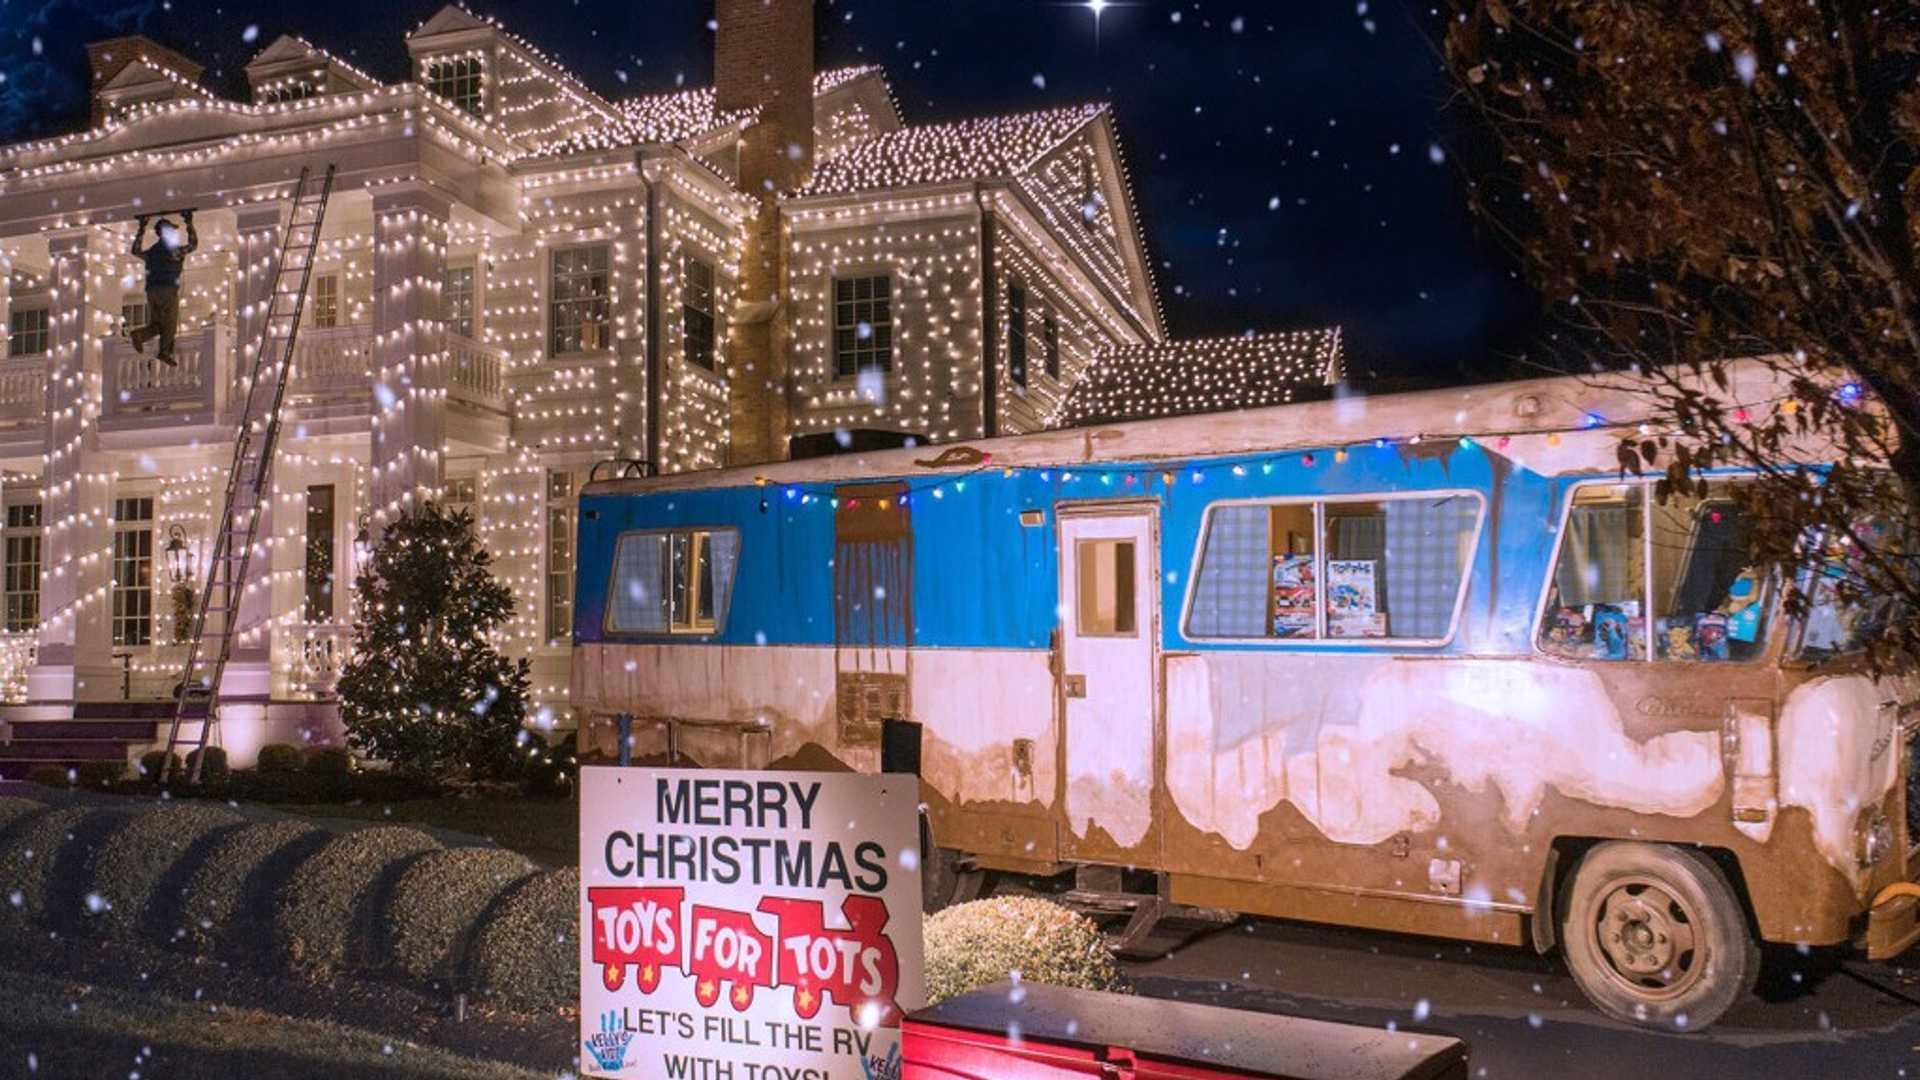 1920x1080 Home-Built 'Christmas Vacation' Display Includes Movie's Iconic Vehicles | Motorious